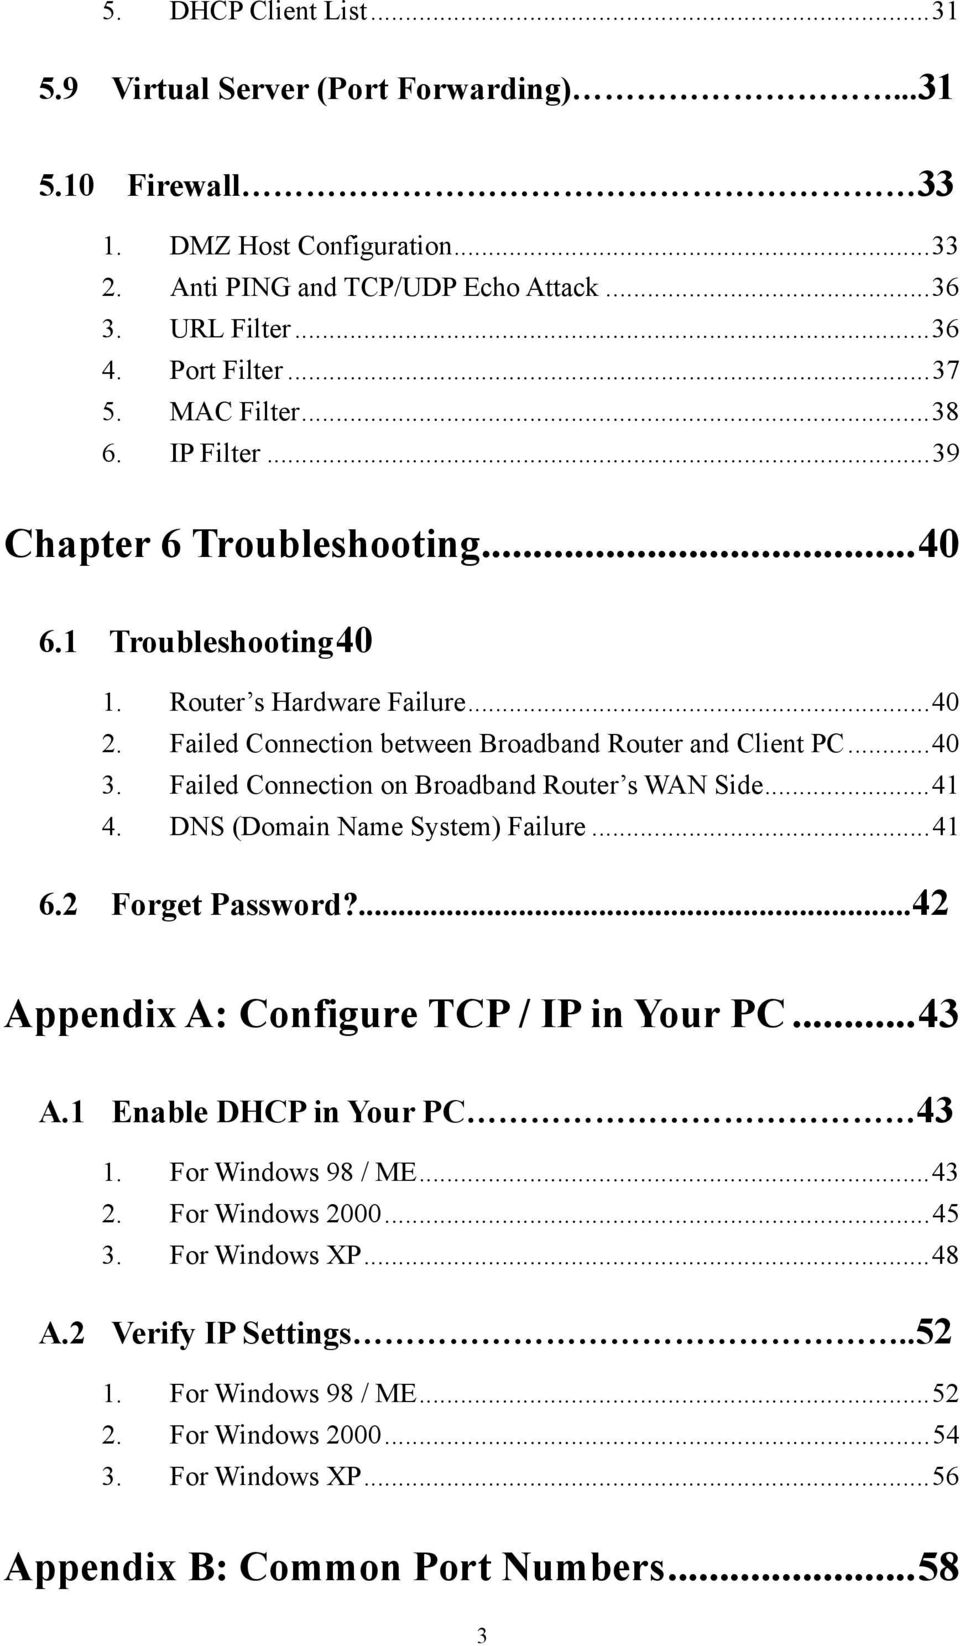 Failed Connection on Broadband Router s WAN Side...41 4. DNS (Domain Name System) Failure...41 6.2 Forget Password?...42 Appendix A: Configure TCP / IP in Your PC...43 A.1 Enable DHCP in Your PC 43 1.